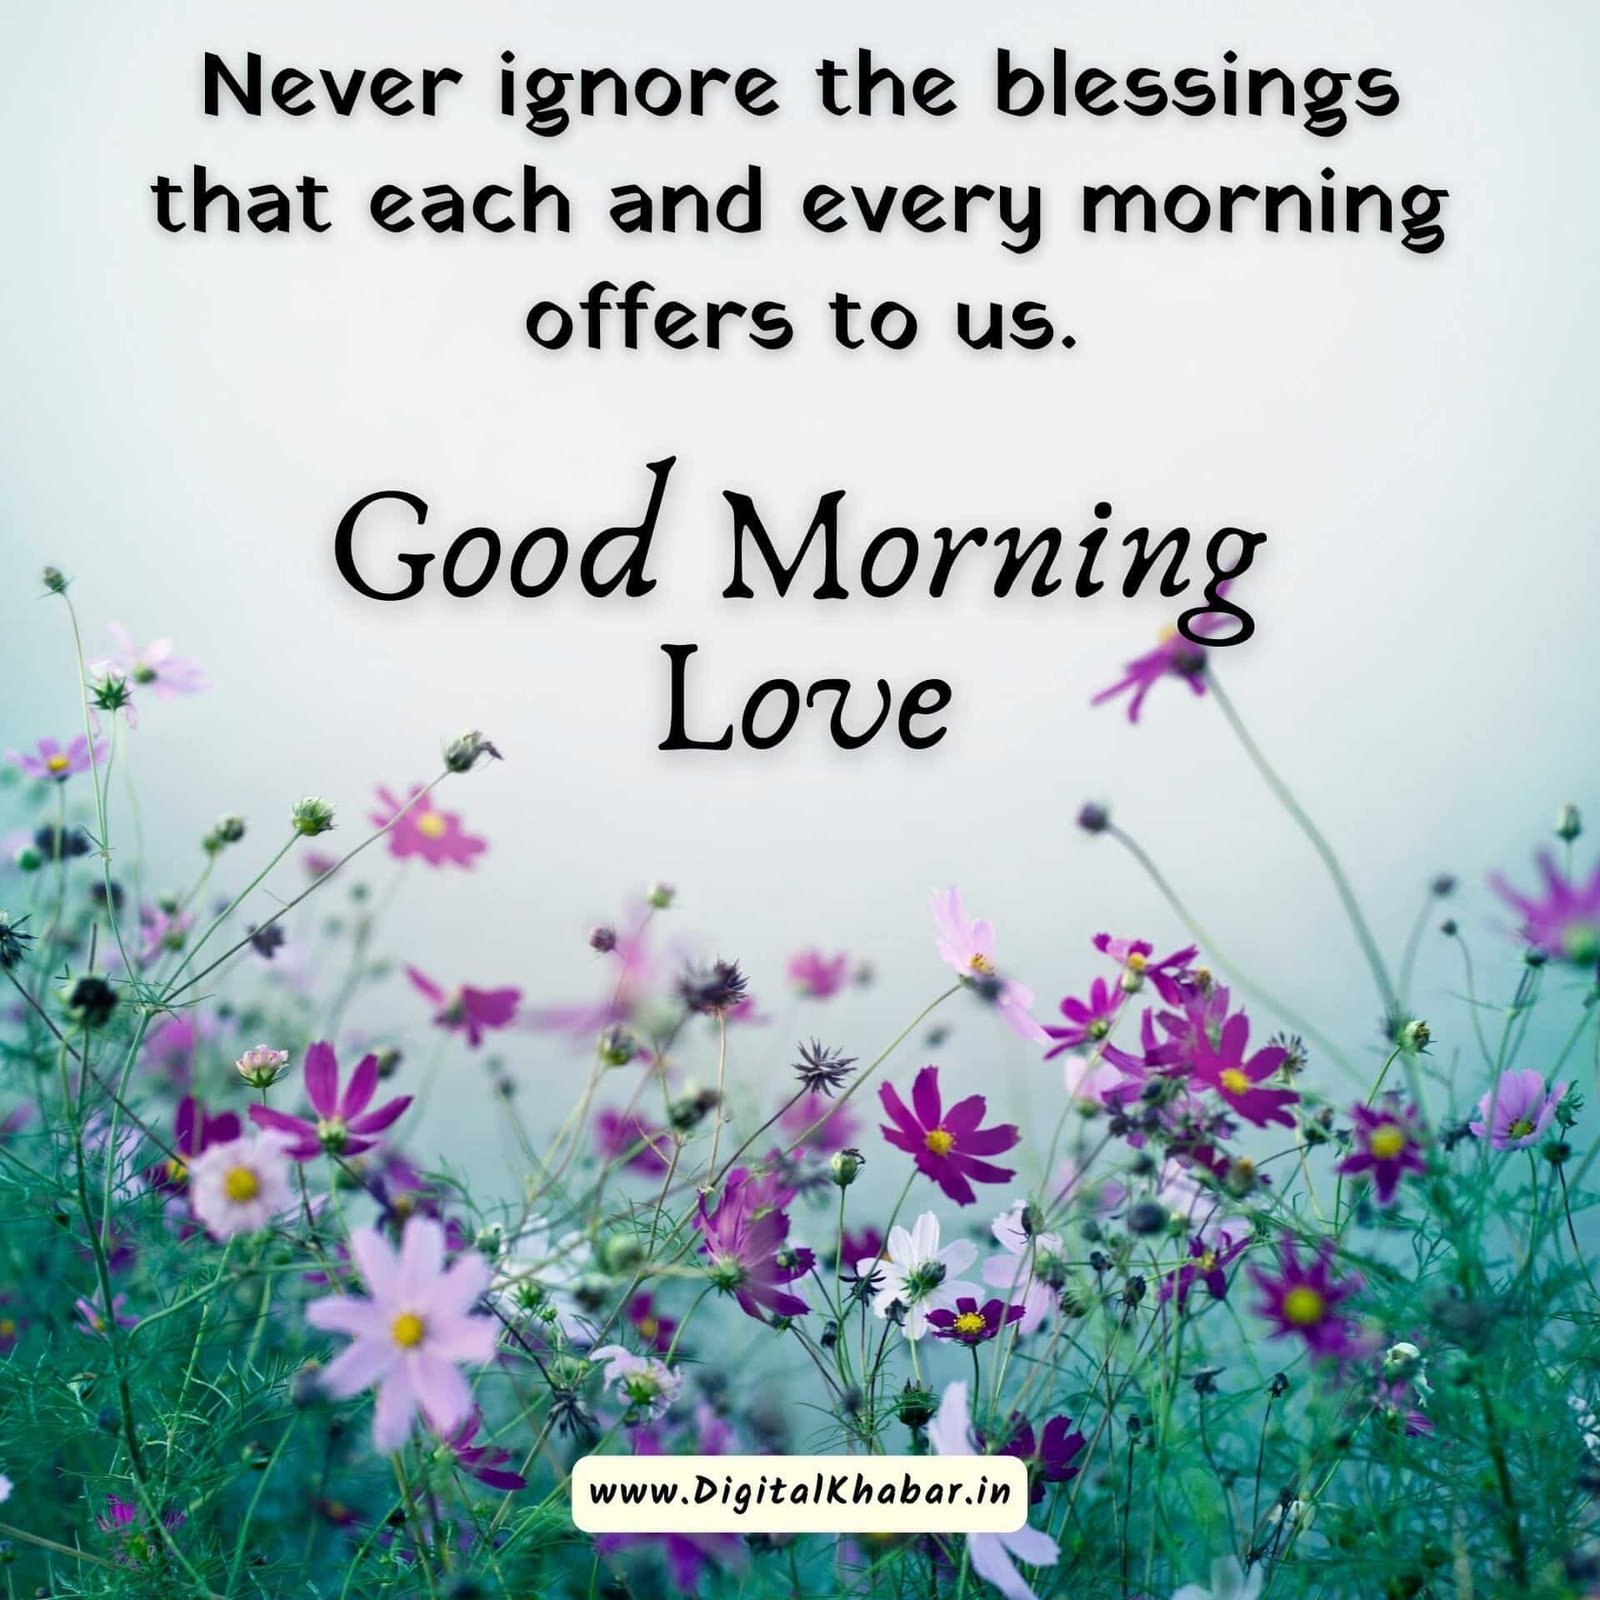 Good morning love Quotes for whatsapp